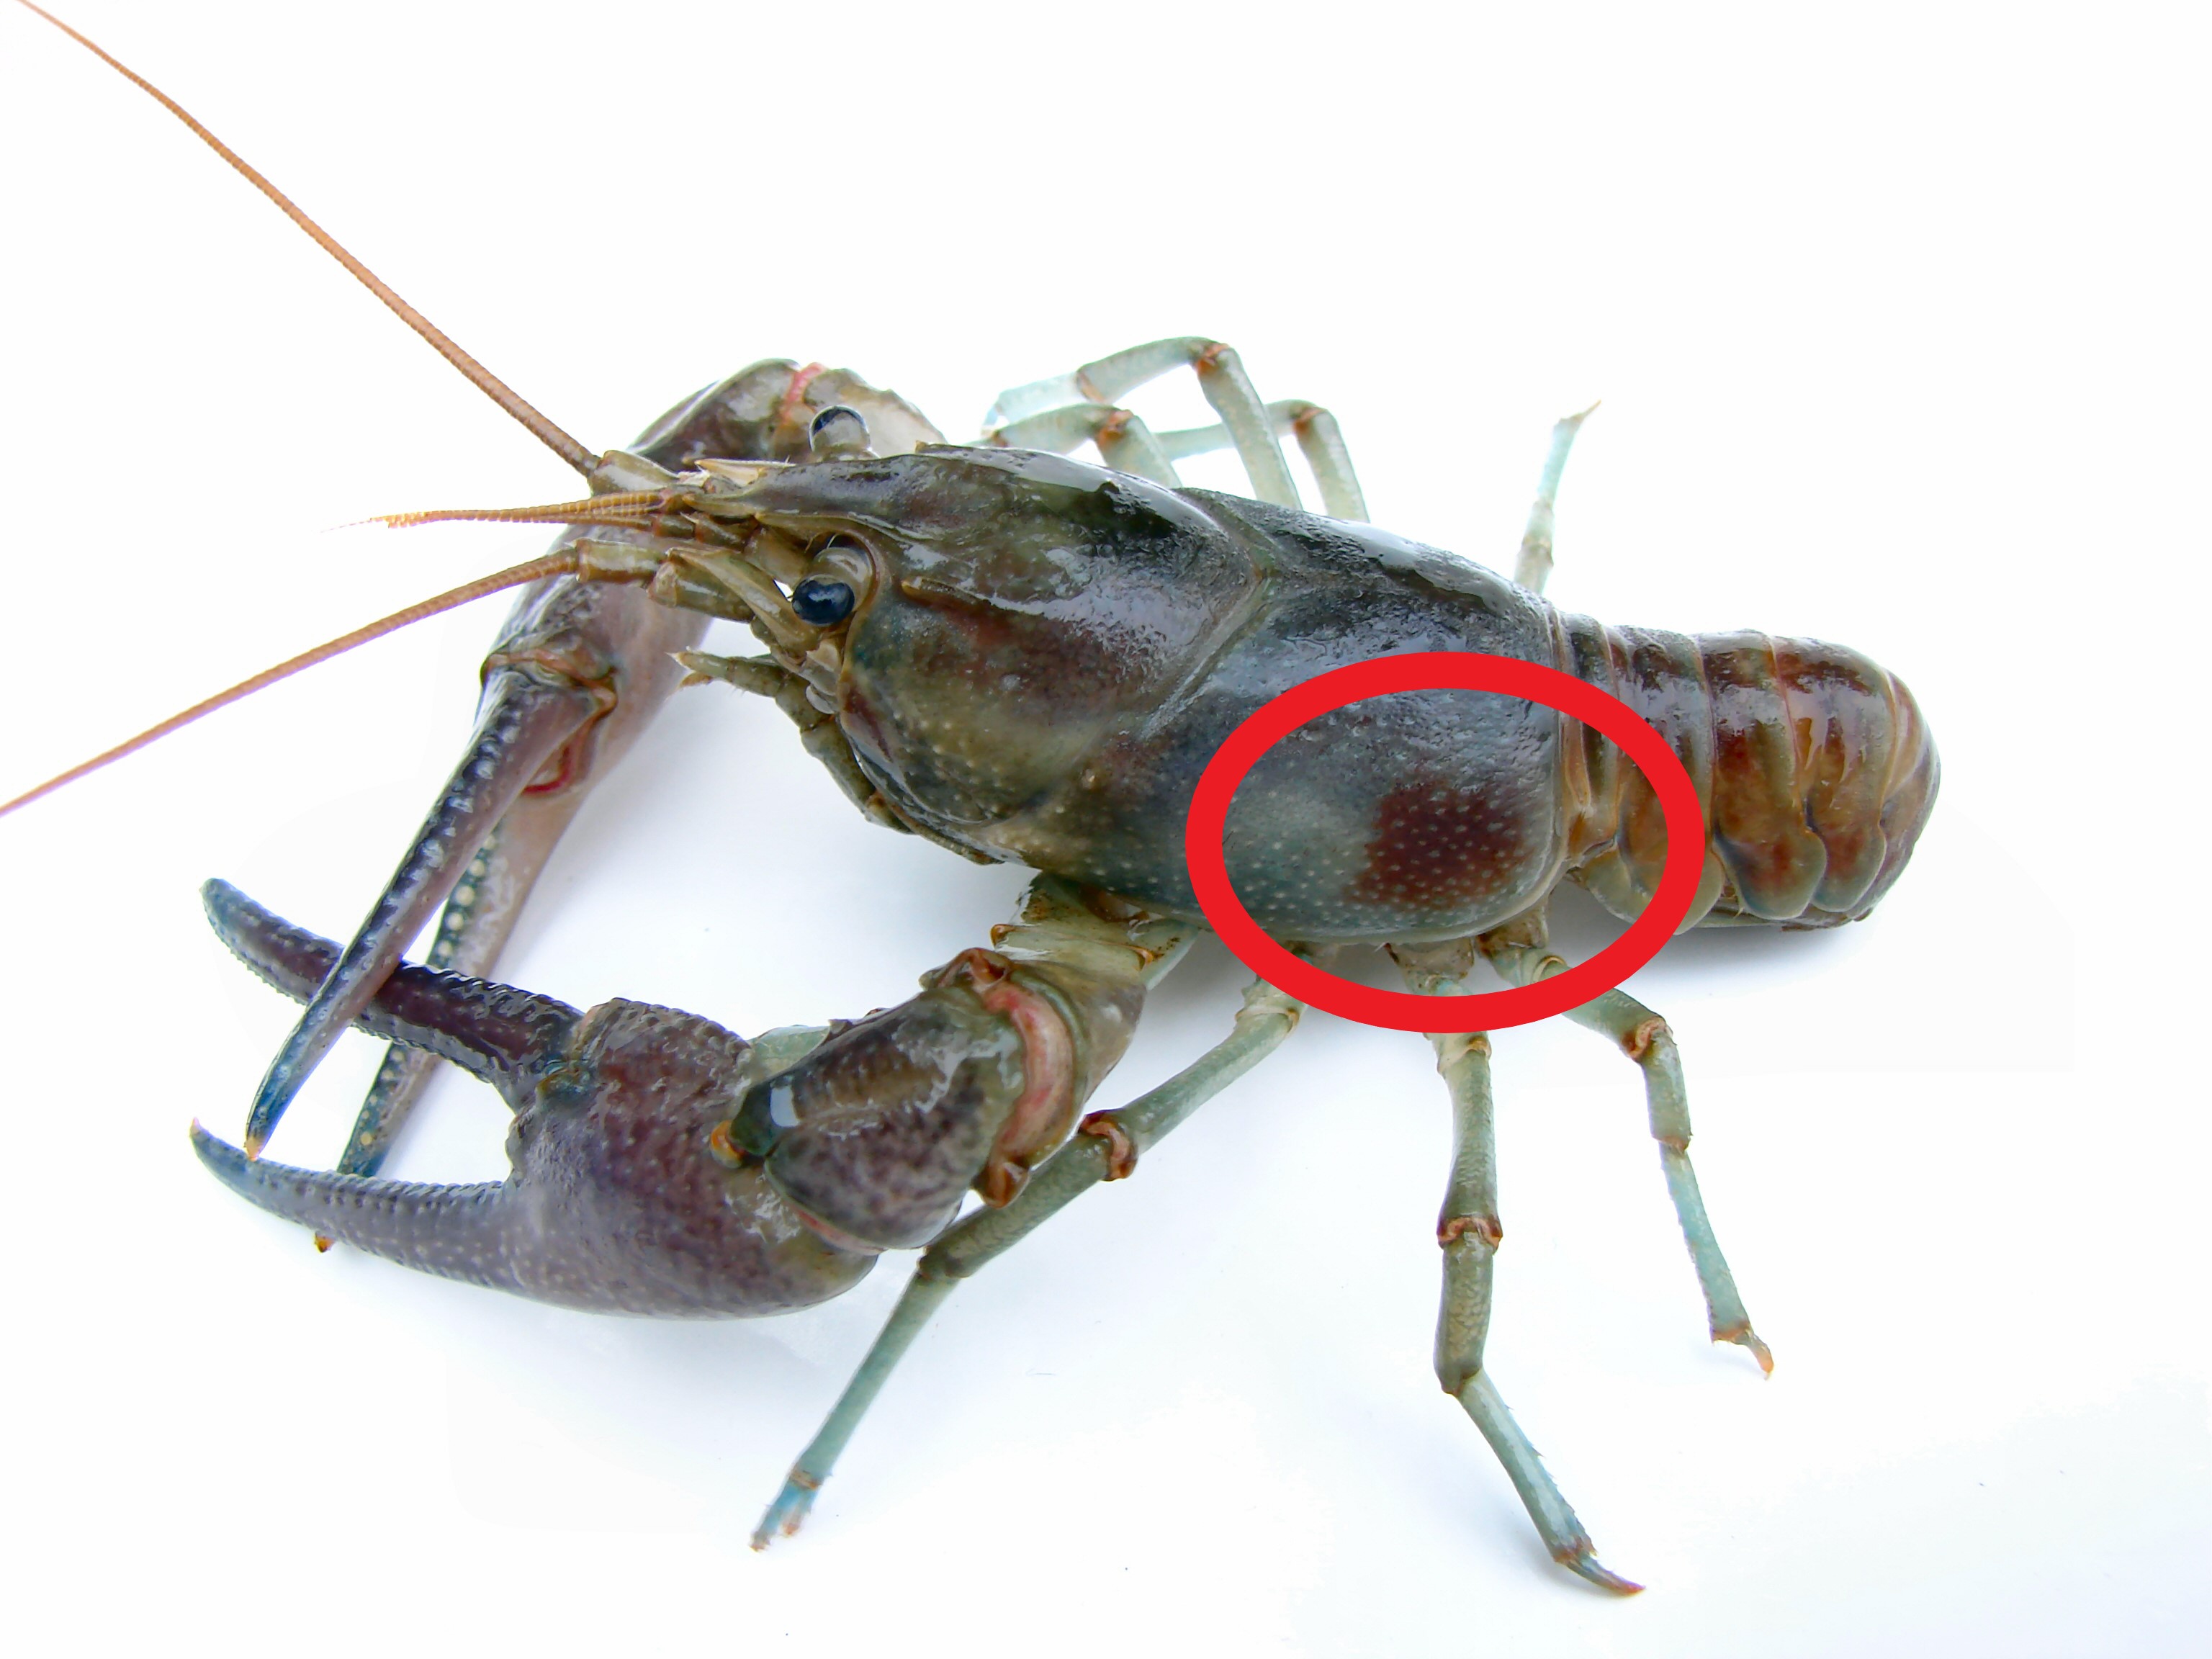 Mark, can I harvest crayfish in Wyoming lakes and rivers?